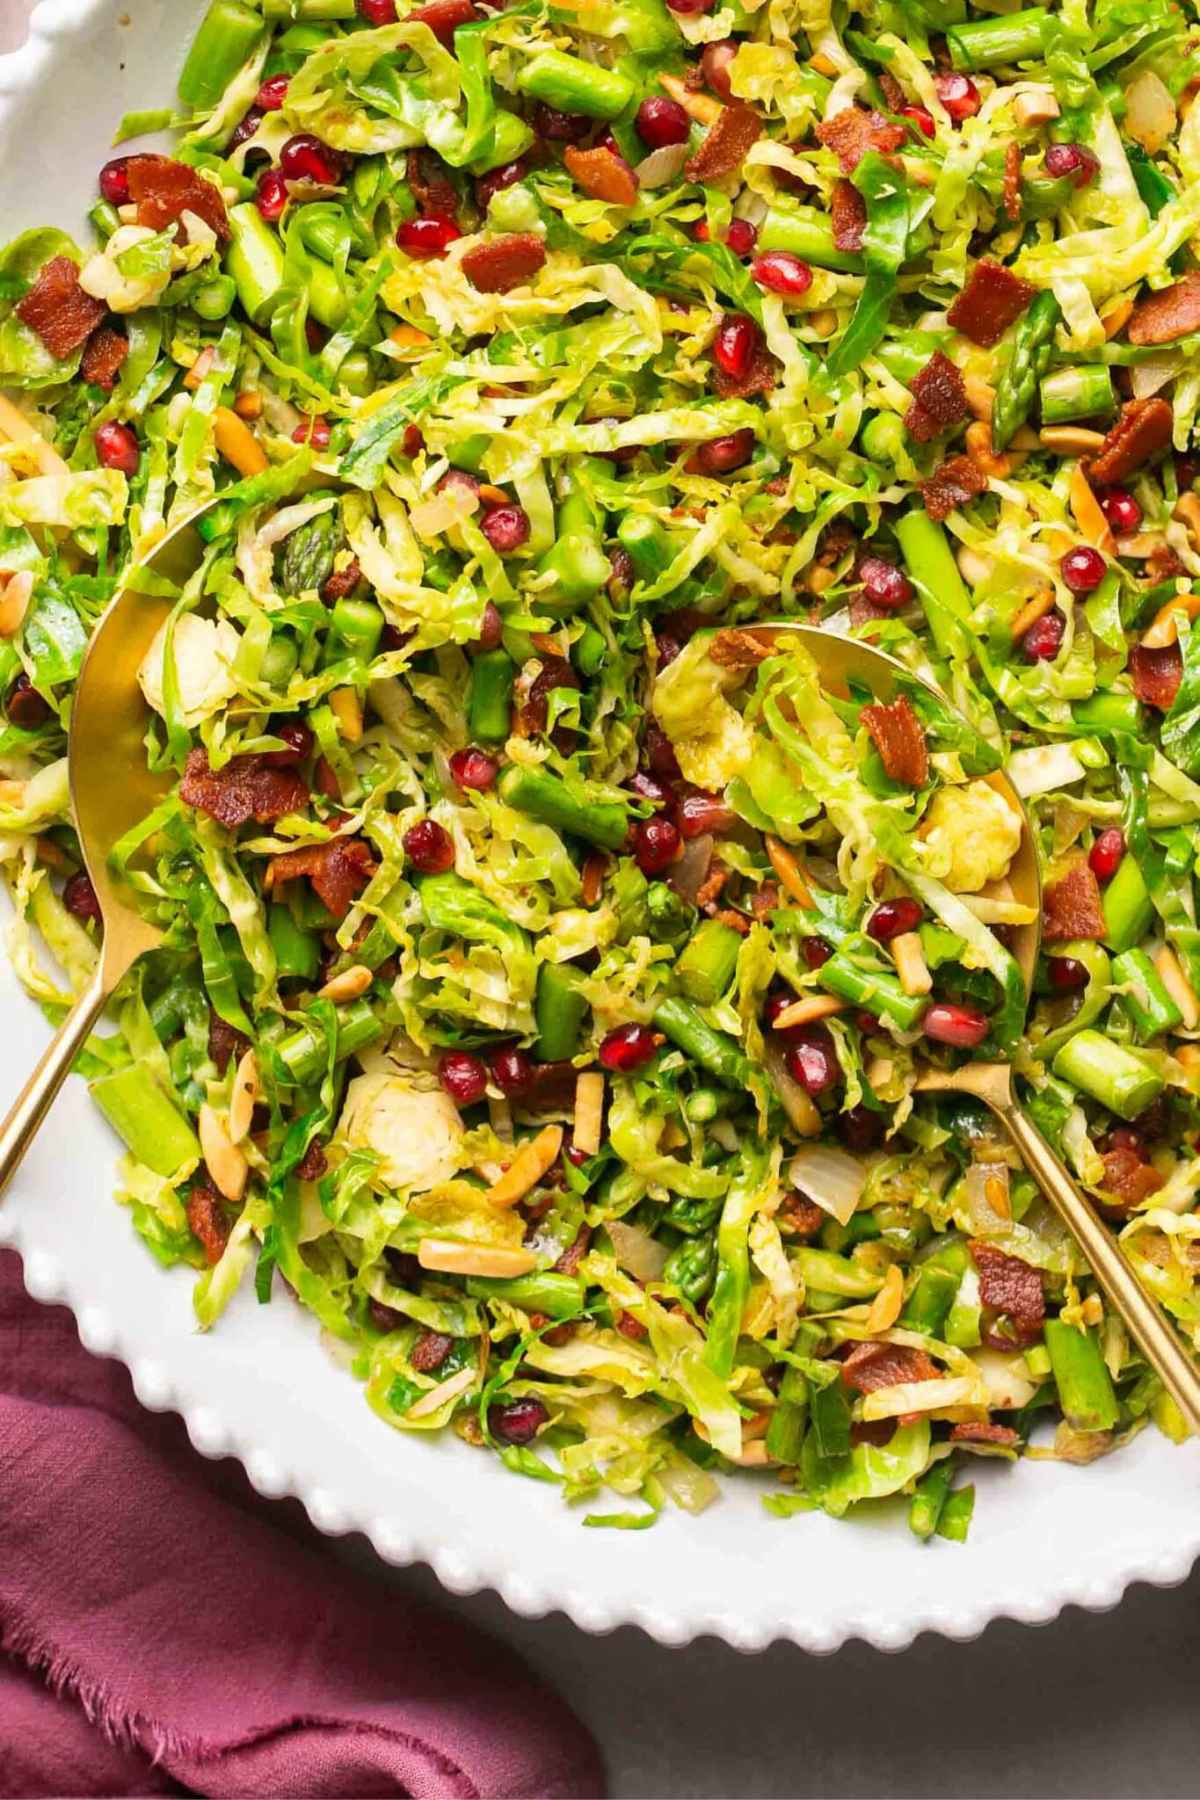 Brussel sprout salad served on a large white platter.